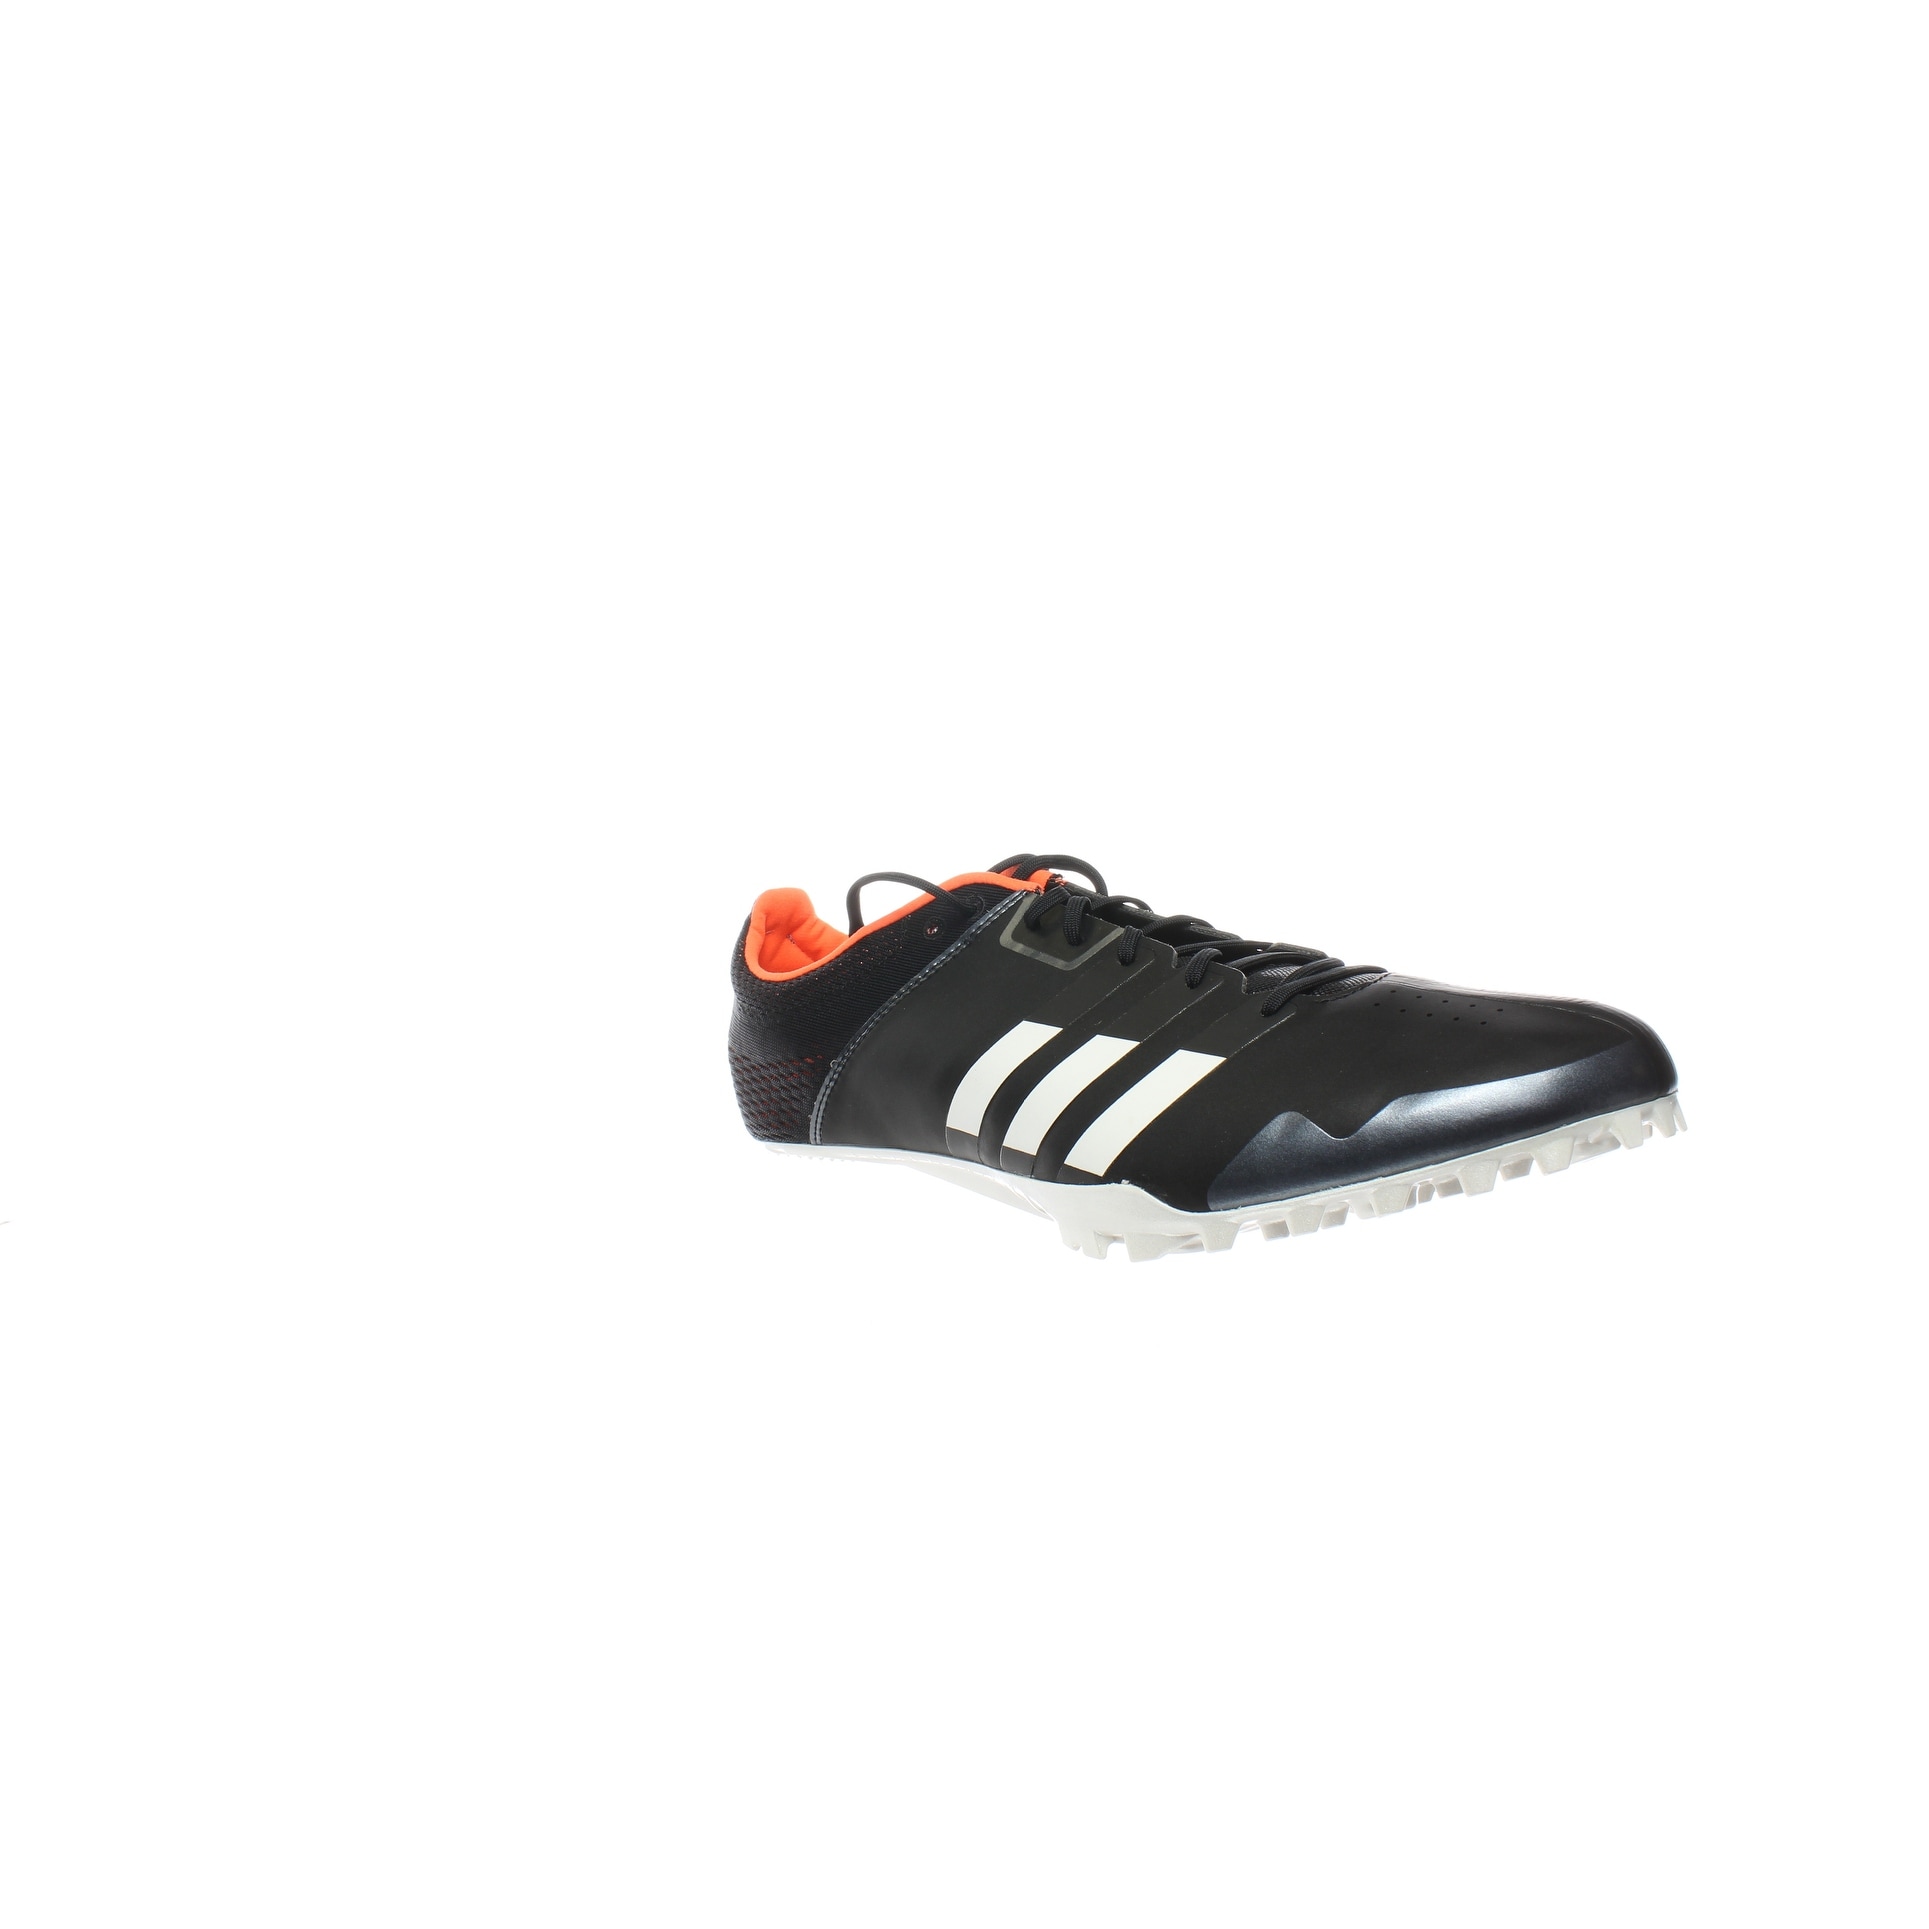 adidas mens shoes size 13